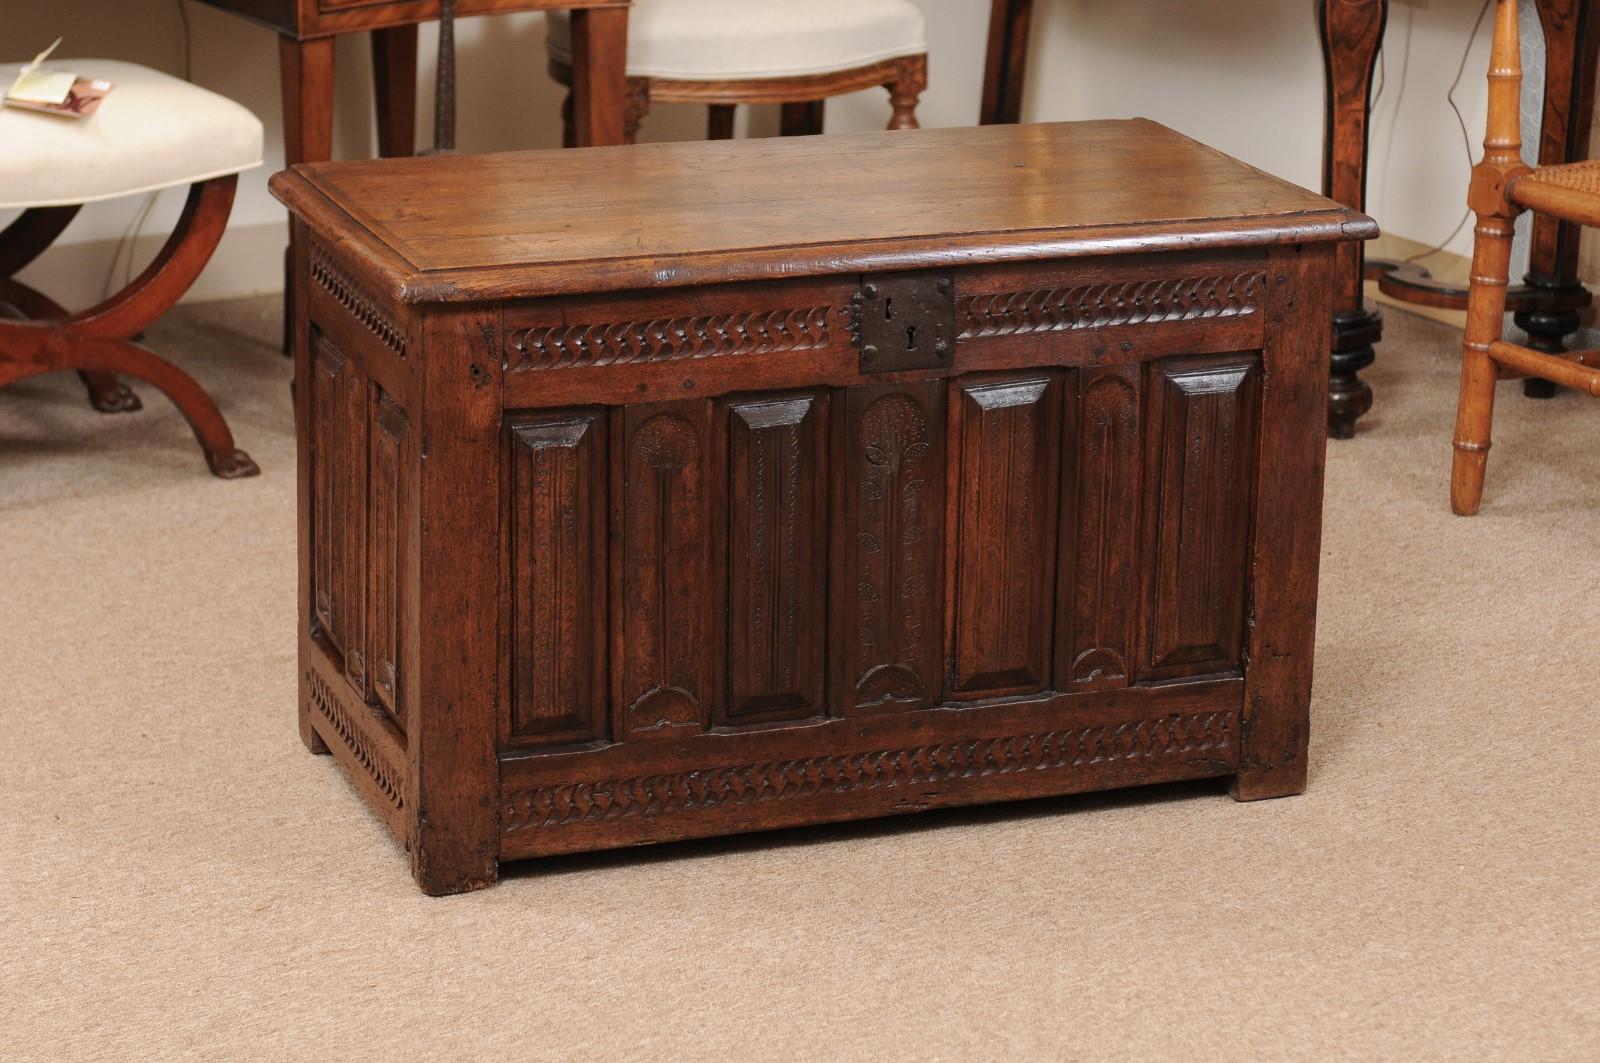 An Italian late 17th century oak cassone with carved front and sides in a foliage and geometric design.